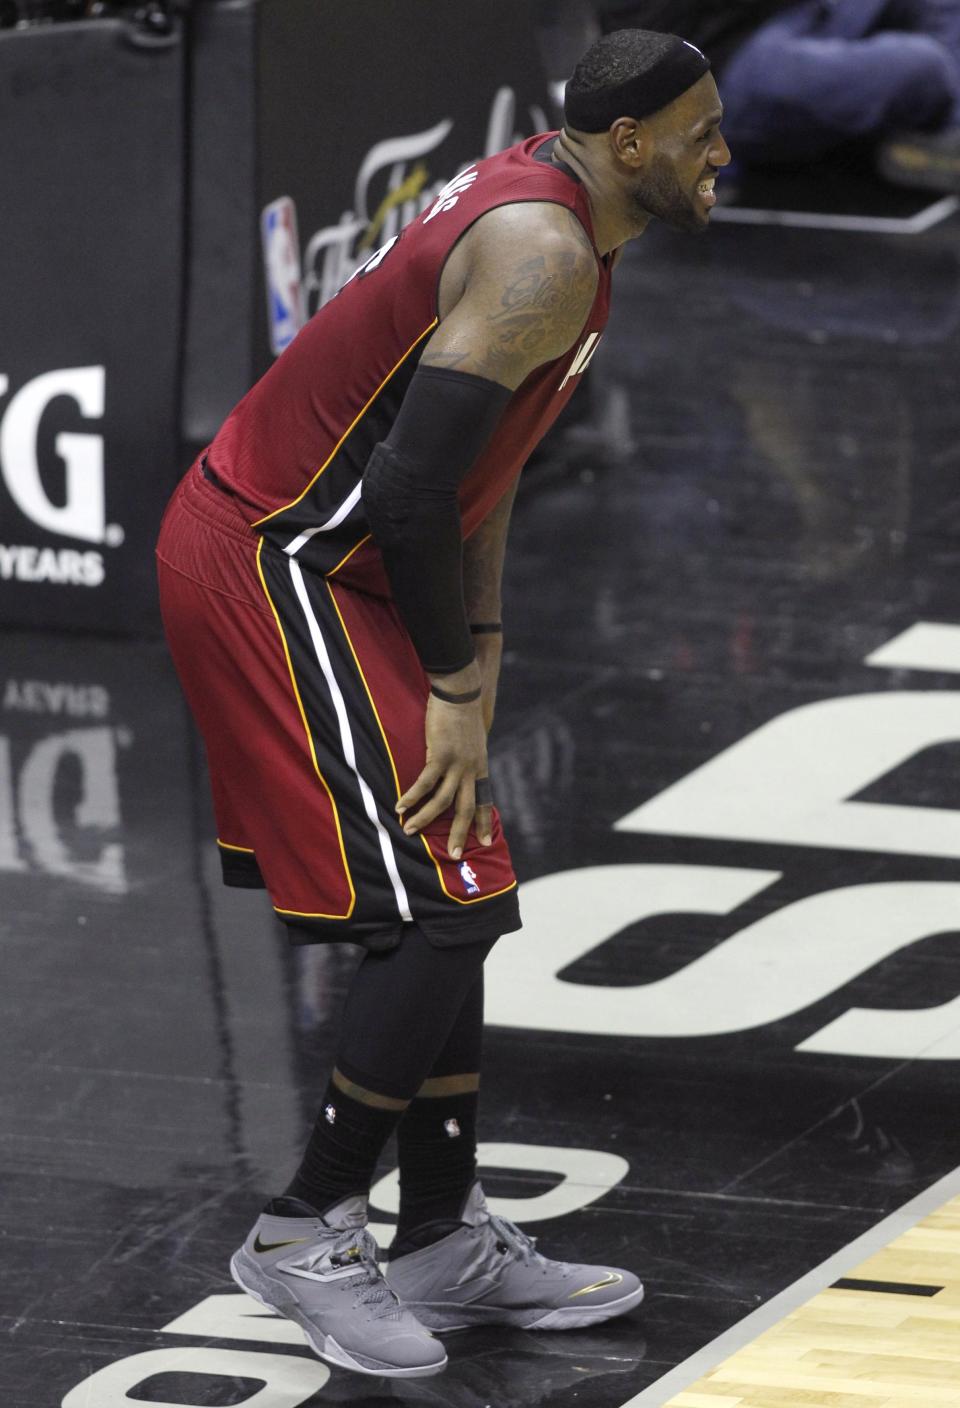 Miami Heat's LeBron James grimaces after hurting his leg during the fourth quarter against the San Antonio Spurs in Game 1 of their NBA Finals basketball series in San Antonio